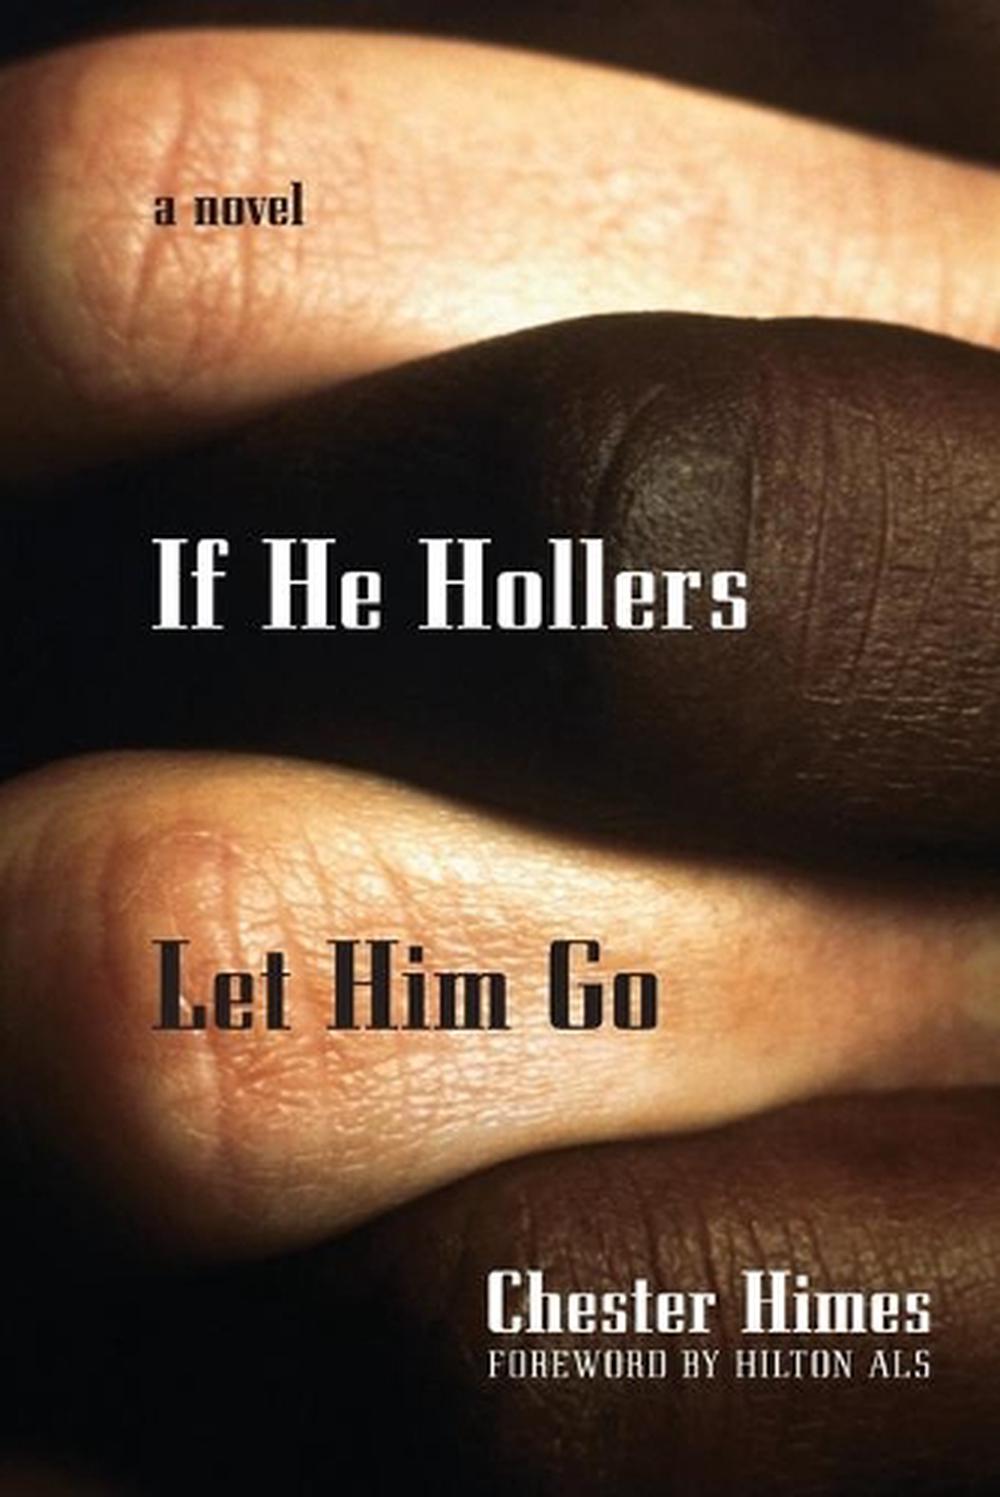 If He Hollers Let Him Go A Novel by Chester B. Himes (English) Paperback Book F 9781560254454